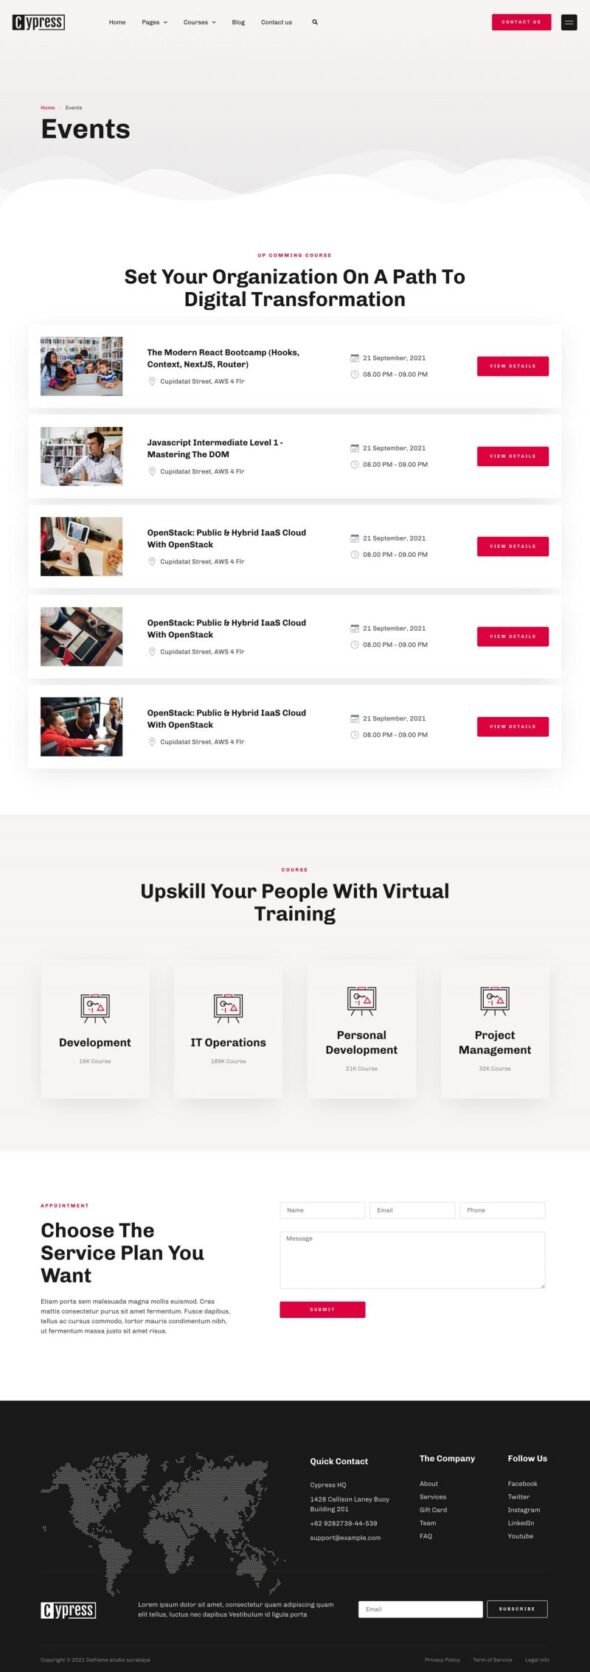 Cypress Online Learning & Courses Elementor Template Kit